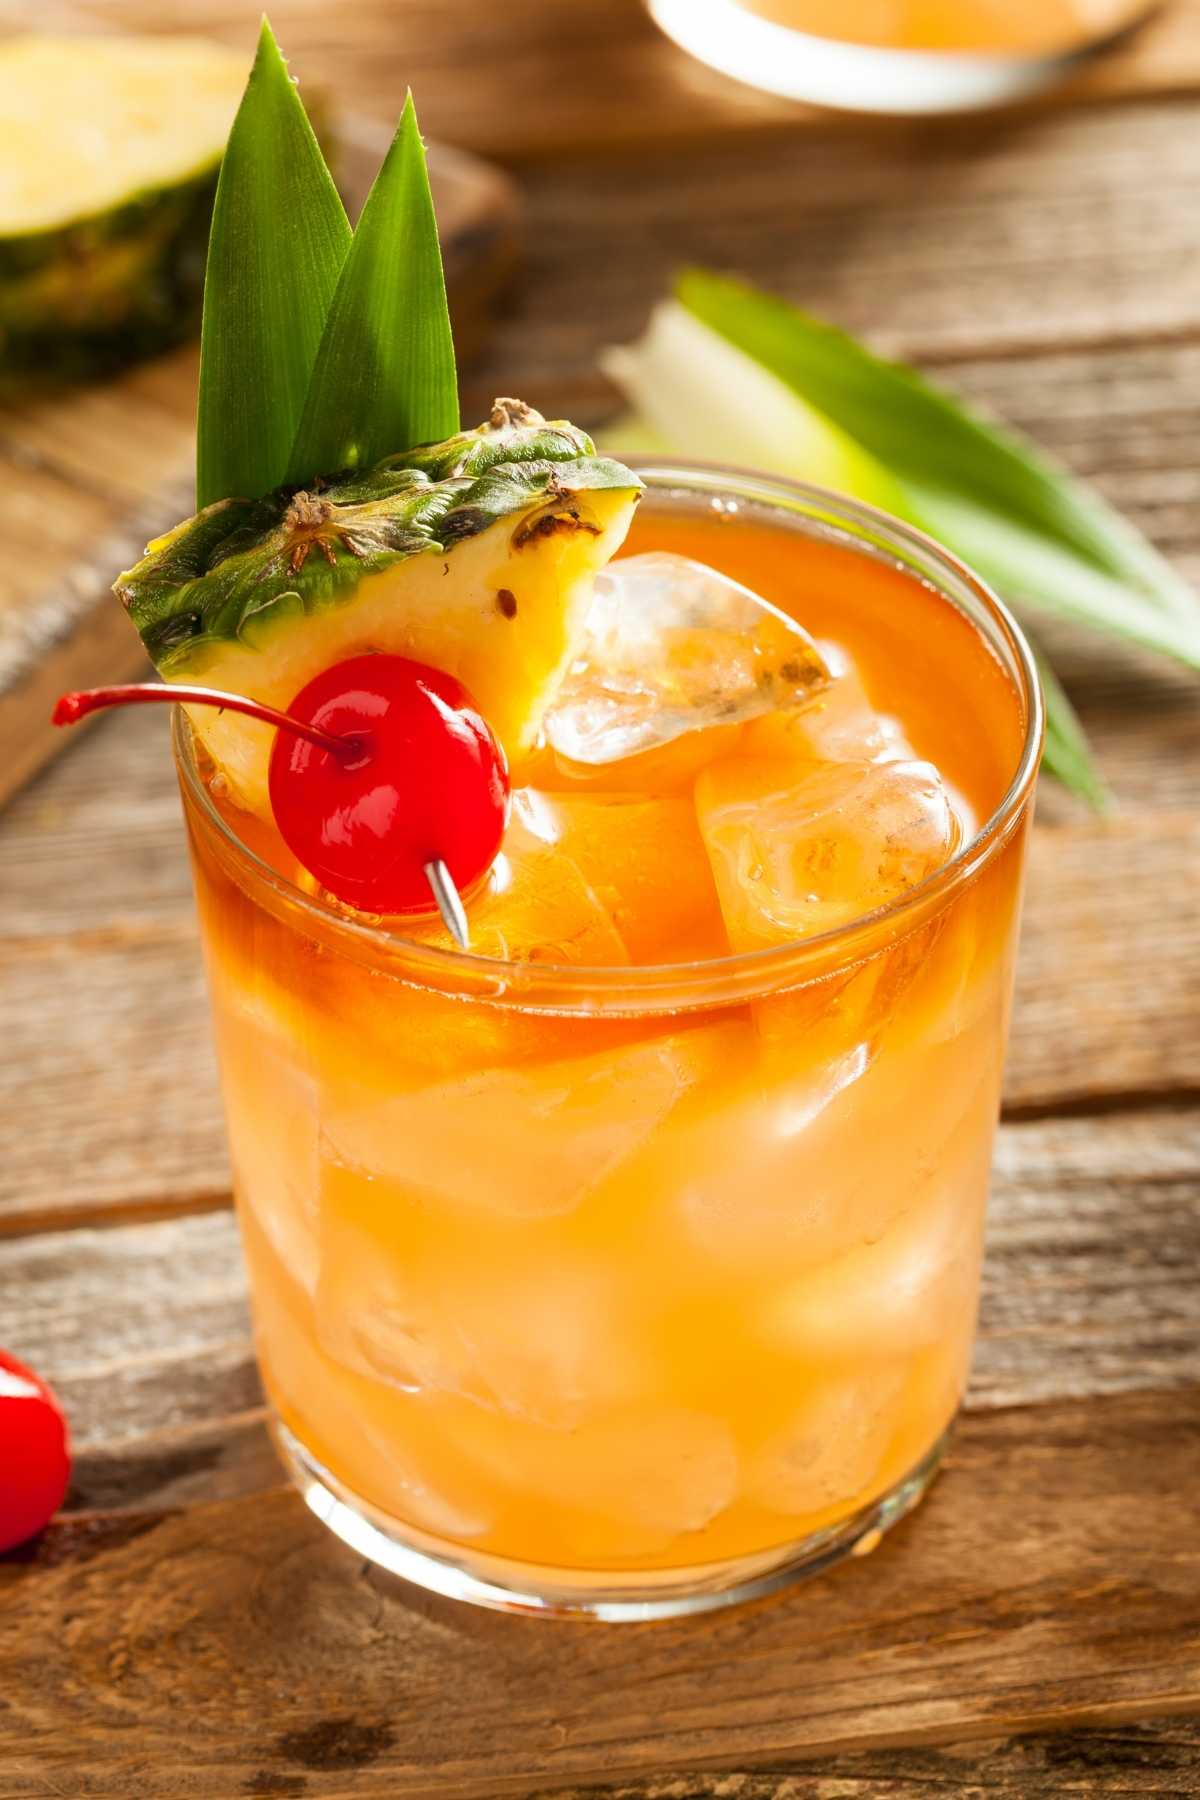 This classic Mai Tai cocktail is boozy, colorful, and delicious! It features two kinds of rum, orange curaçao, lime juice, and orgeat syrup.